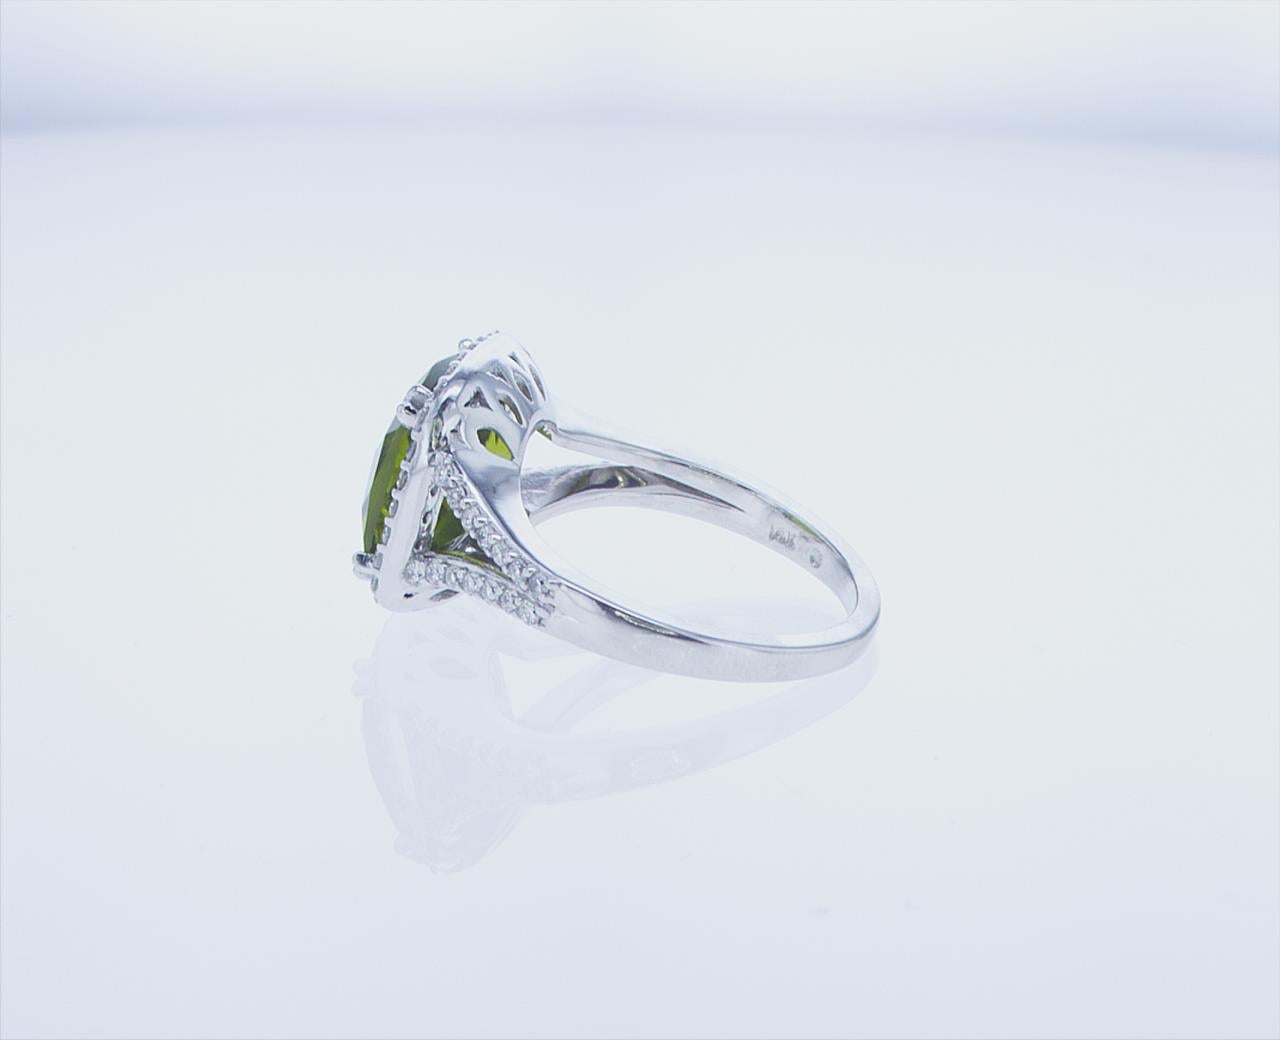 5.18ct Cushion Shape Peridot Cocktail Ring in 14k White Gold For Sale 6